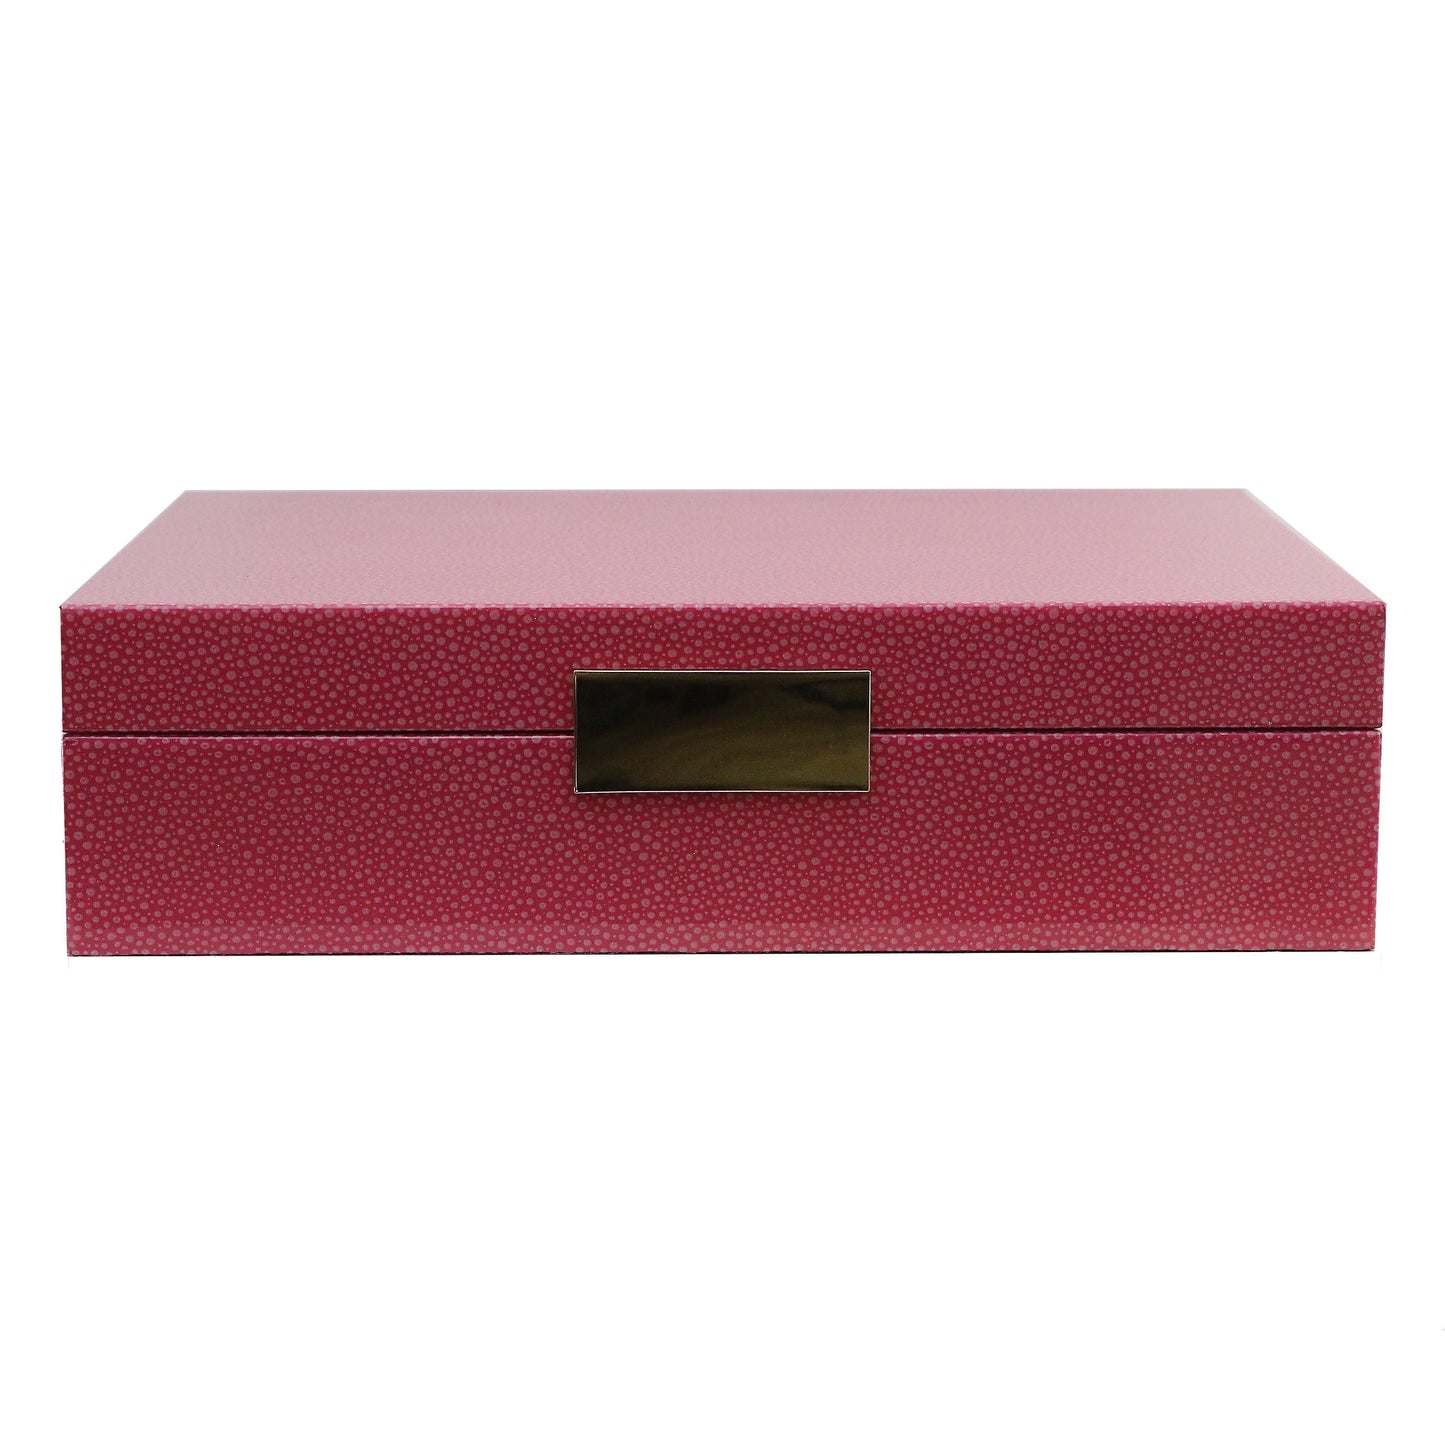 Large Pink Shagreen Lacquer Box with Gold - Addison Ross Ltd UK